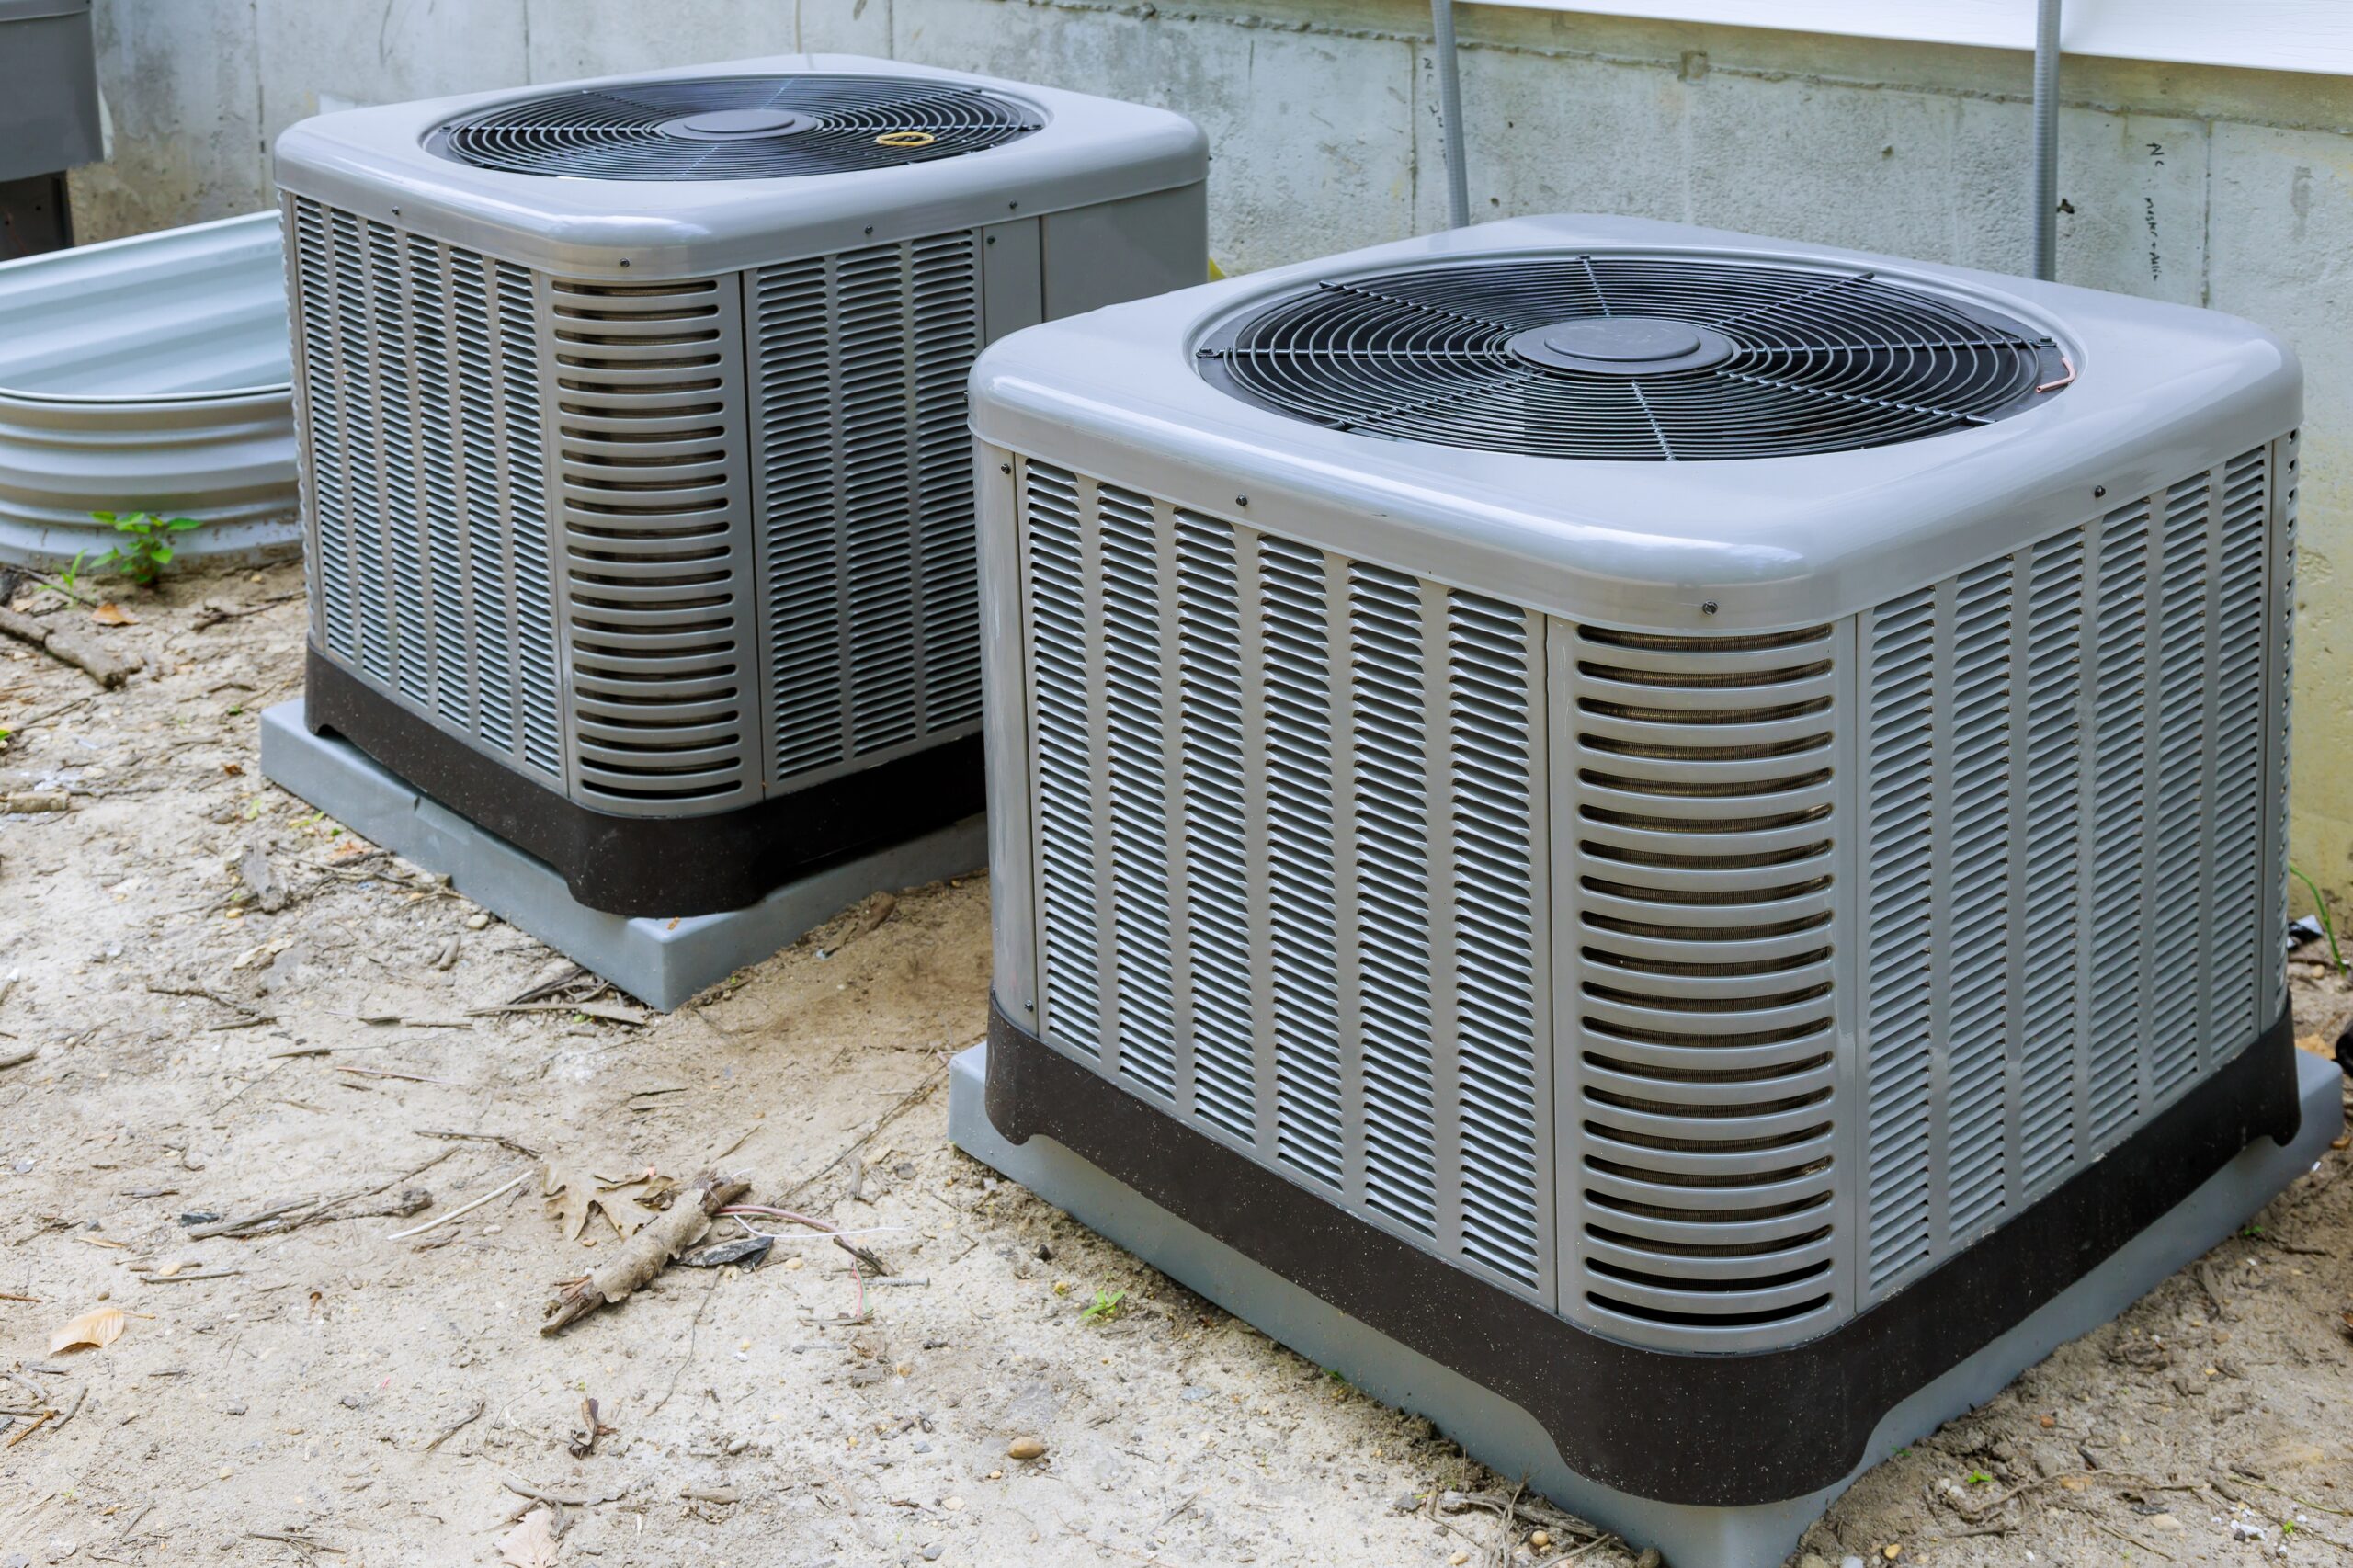 When should I replace my air conditioner?